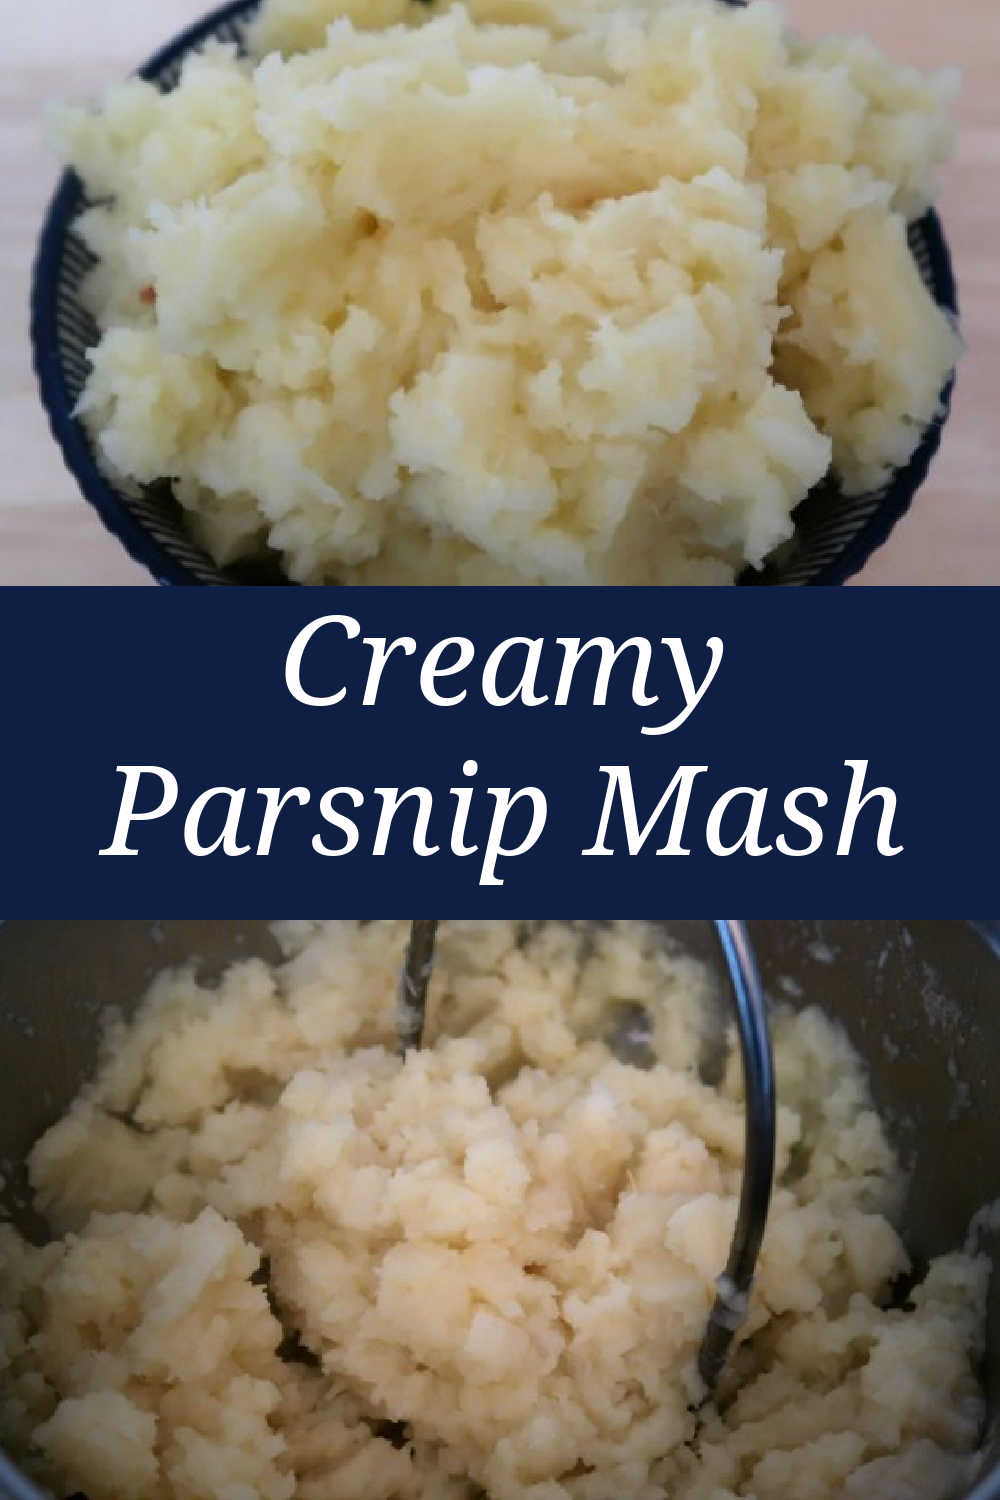 Parsnip Mash Recipe - How to cook creamy mashed parsnips with garlic and other healthy ingredients. Quick and easy, cheap side dishes to enjoy when parsnips are in season.